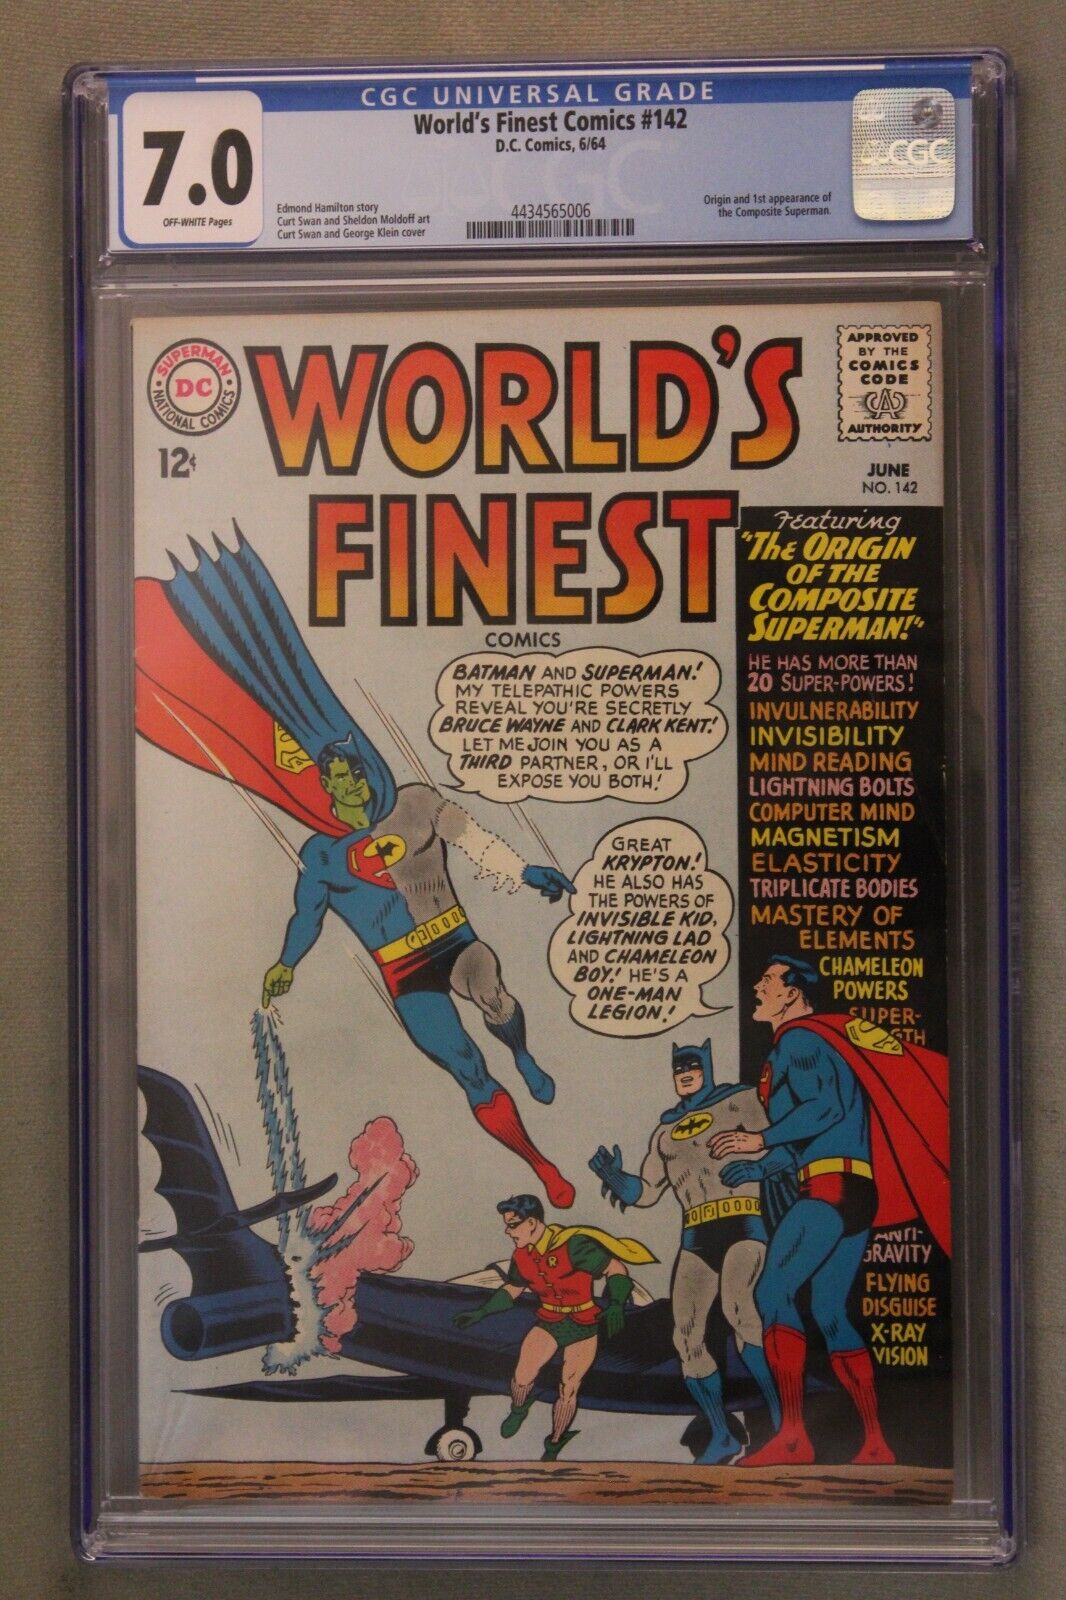 World's Finest Comics #142, D.C. Comics 6/64, CGC Graded at 7.0, Off-White Pages